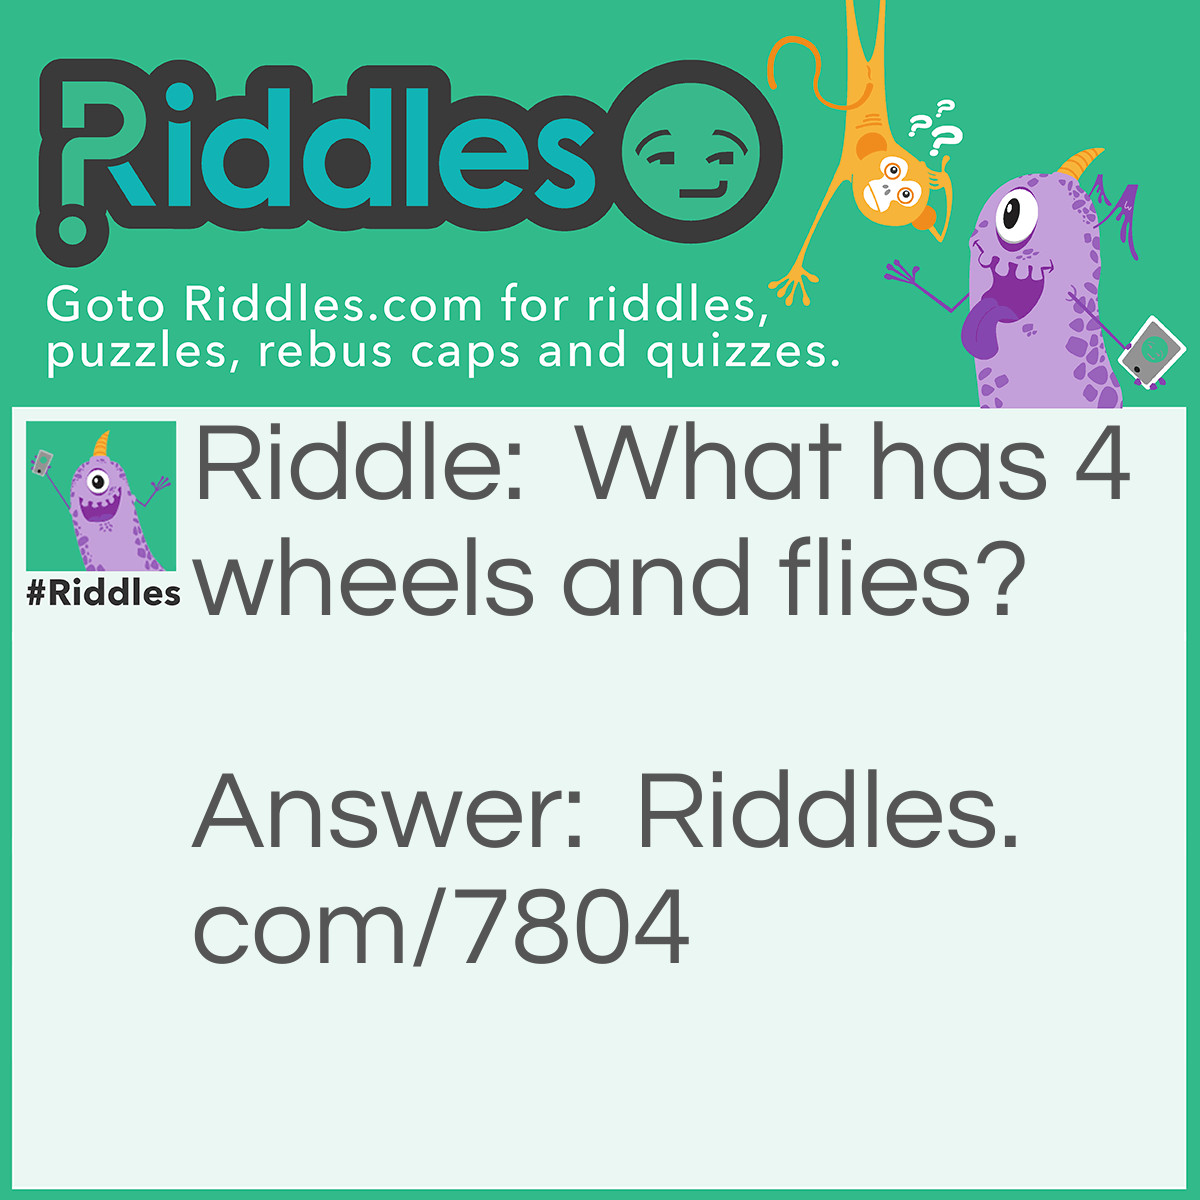 Riddle: What has 4 wheels and flies? Answer: A Garbage Truck.